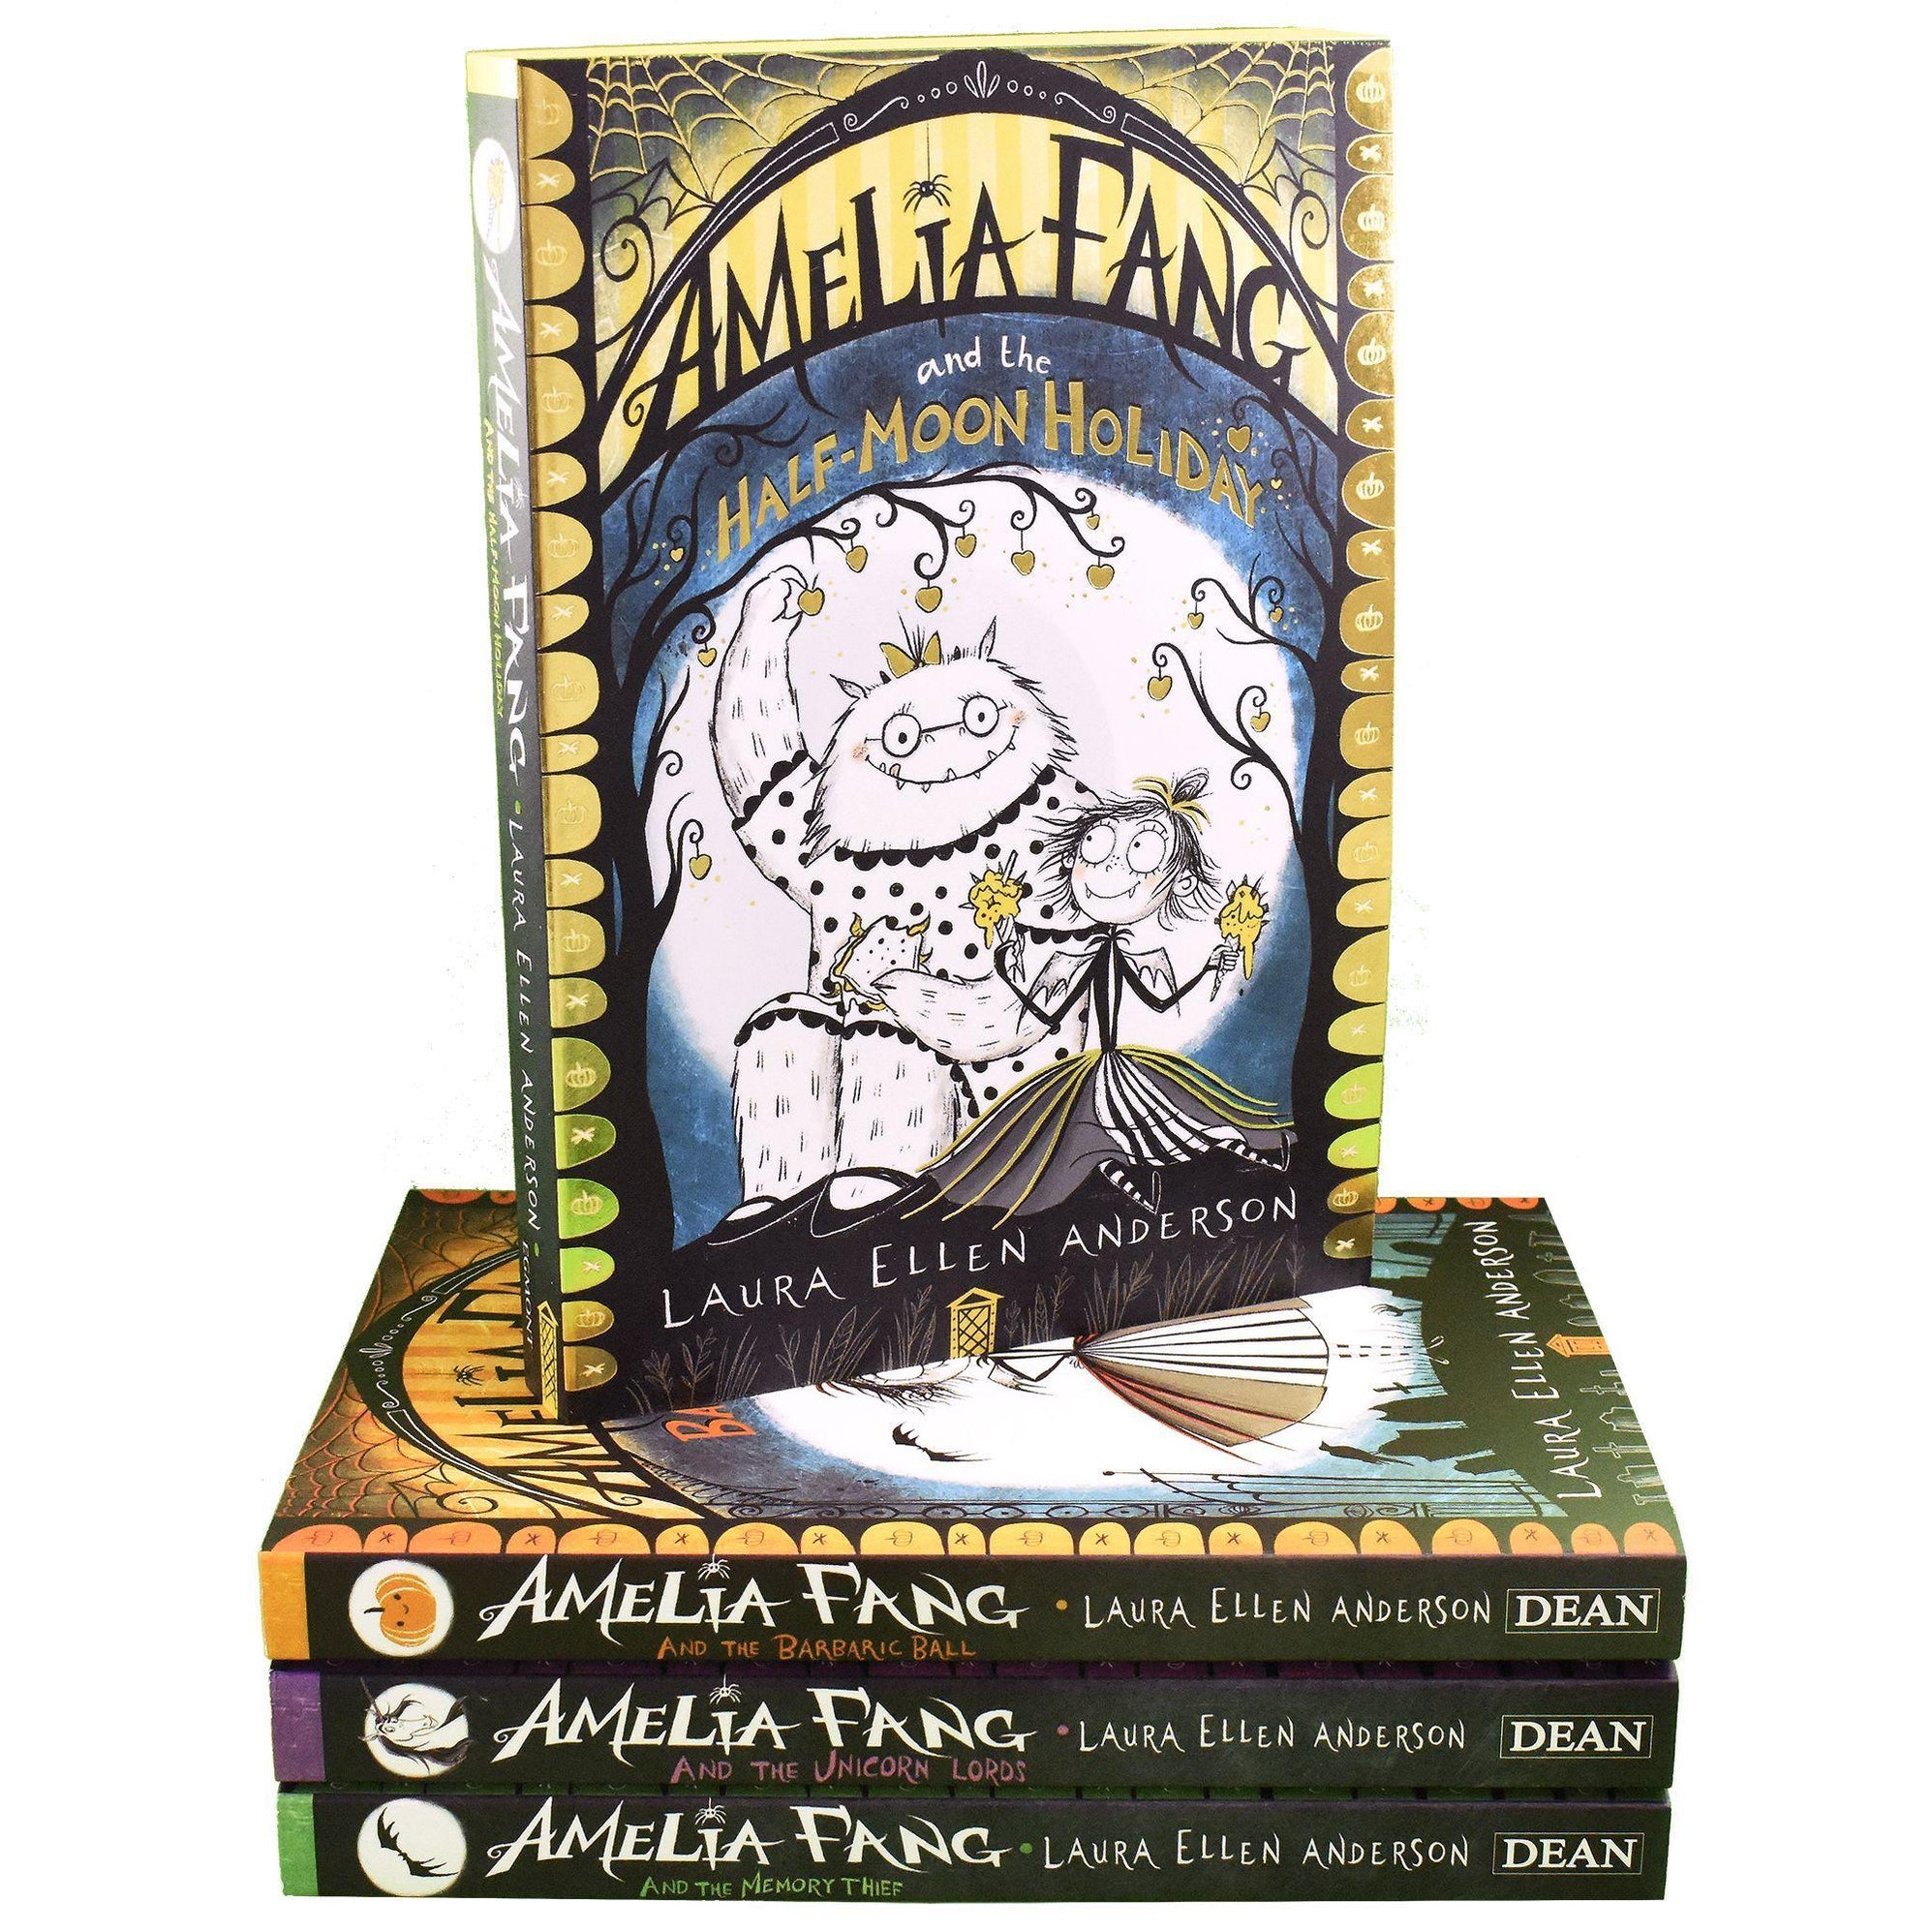 67 Top Best Writers Amelia Fang Book 4 from Famous authors